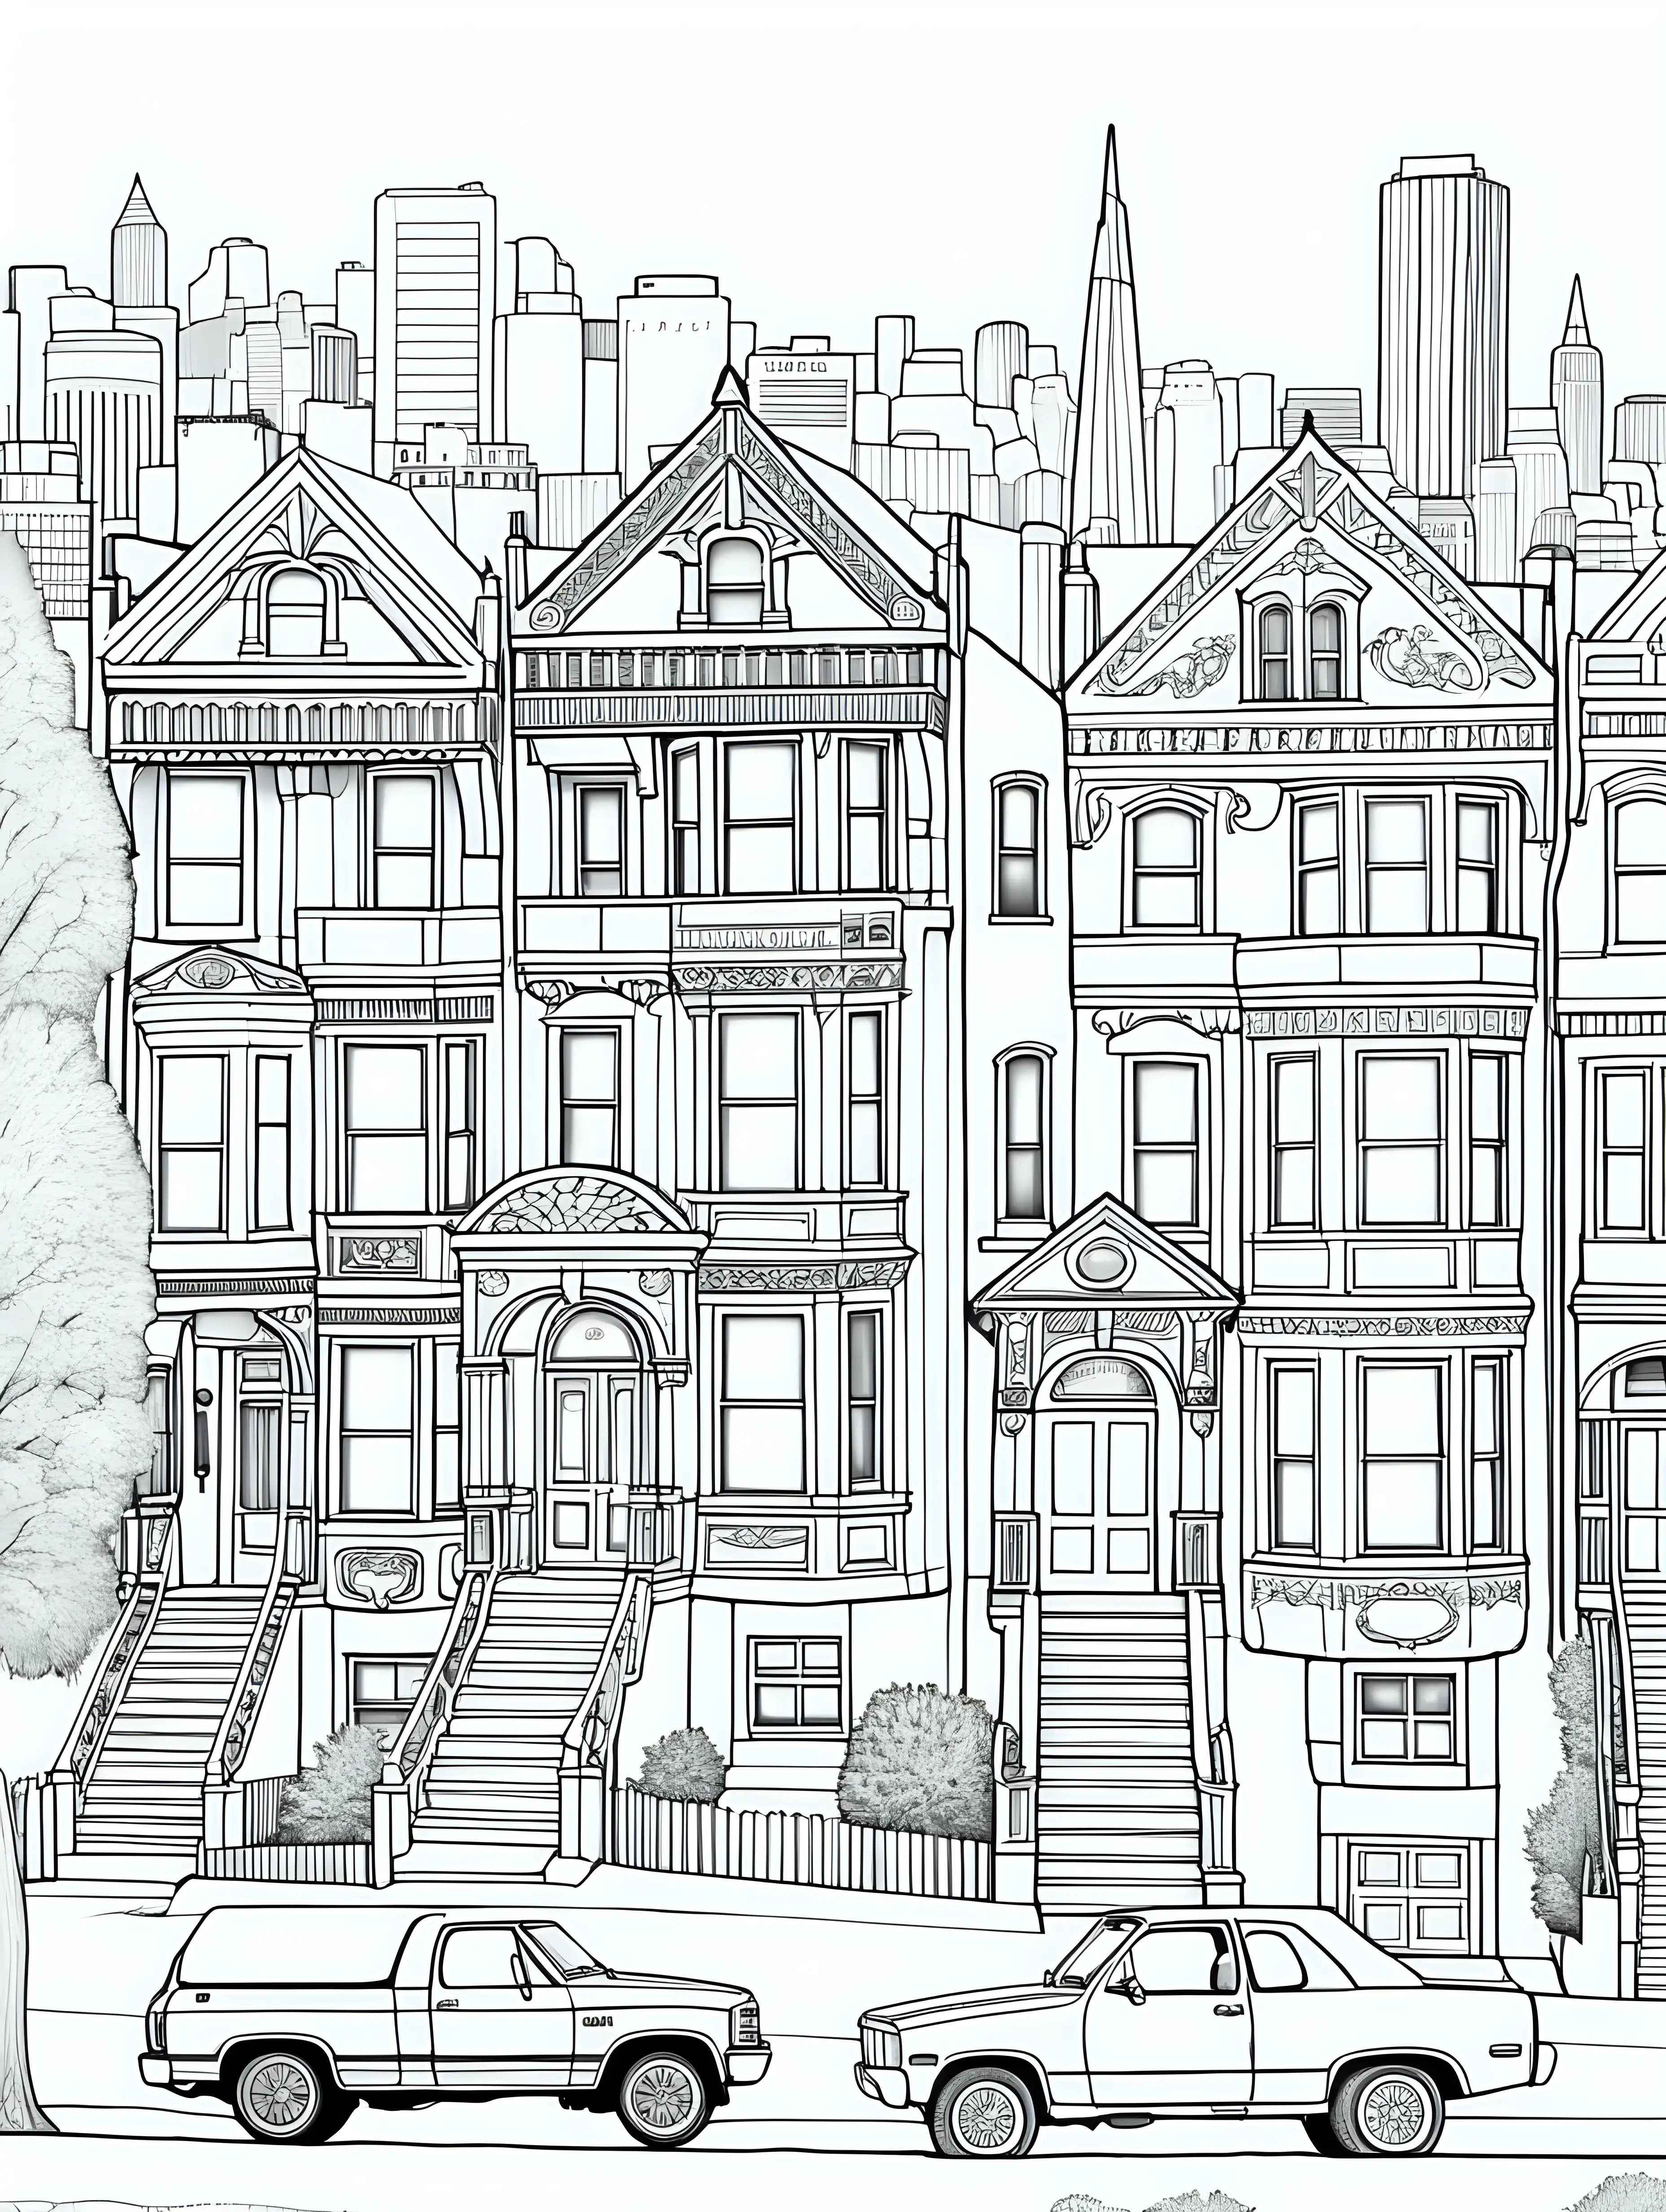 San Francisco Style Townhouses Coloring Page for Kids